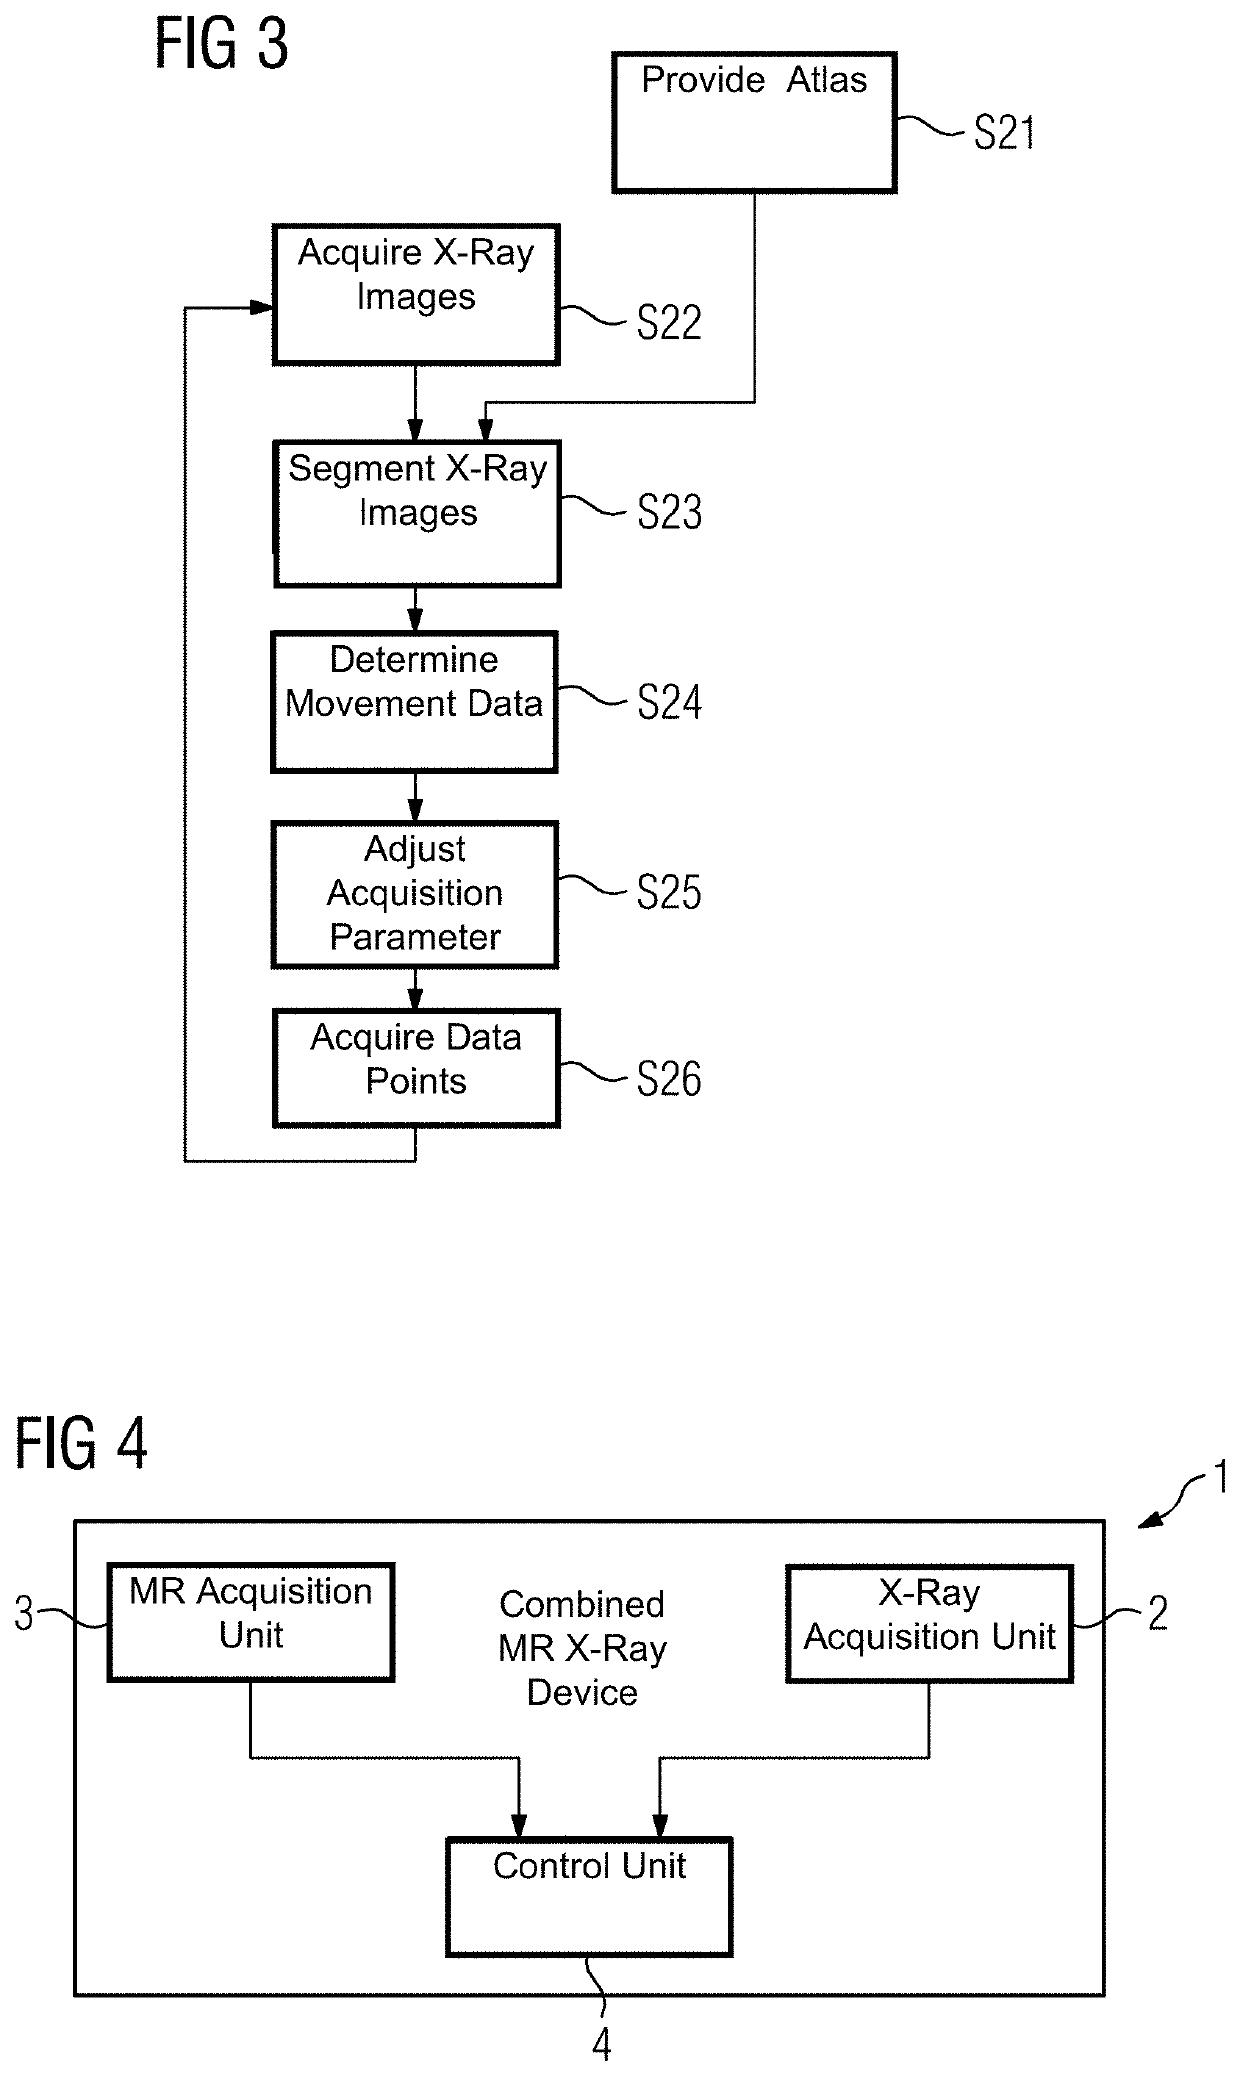 Acquisition and processing of measurement data by a combined magnetic resonance and X-ray device